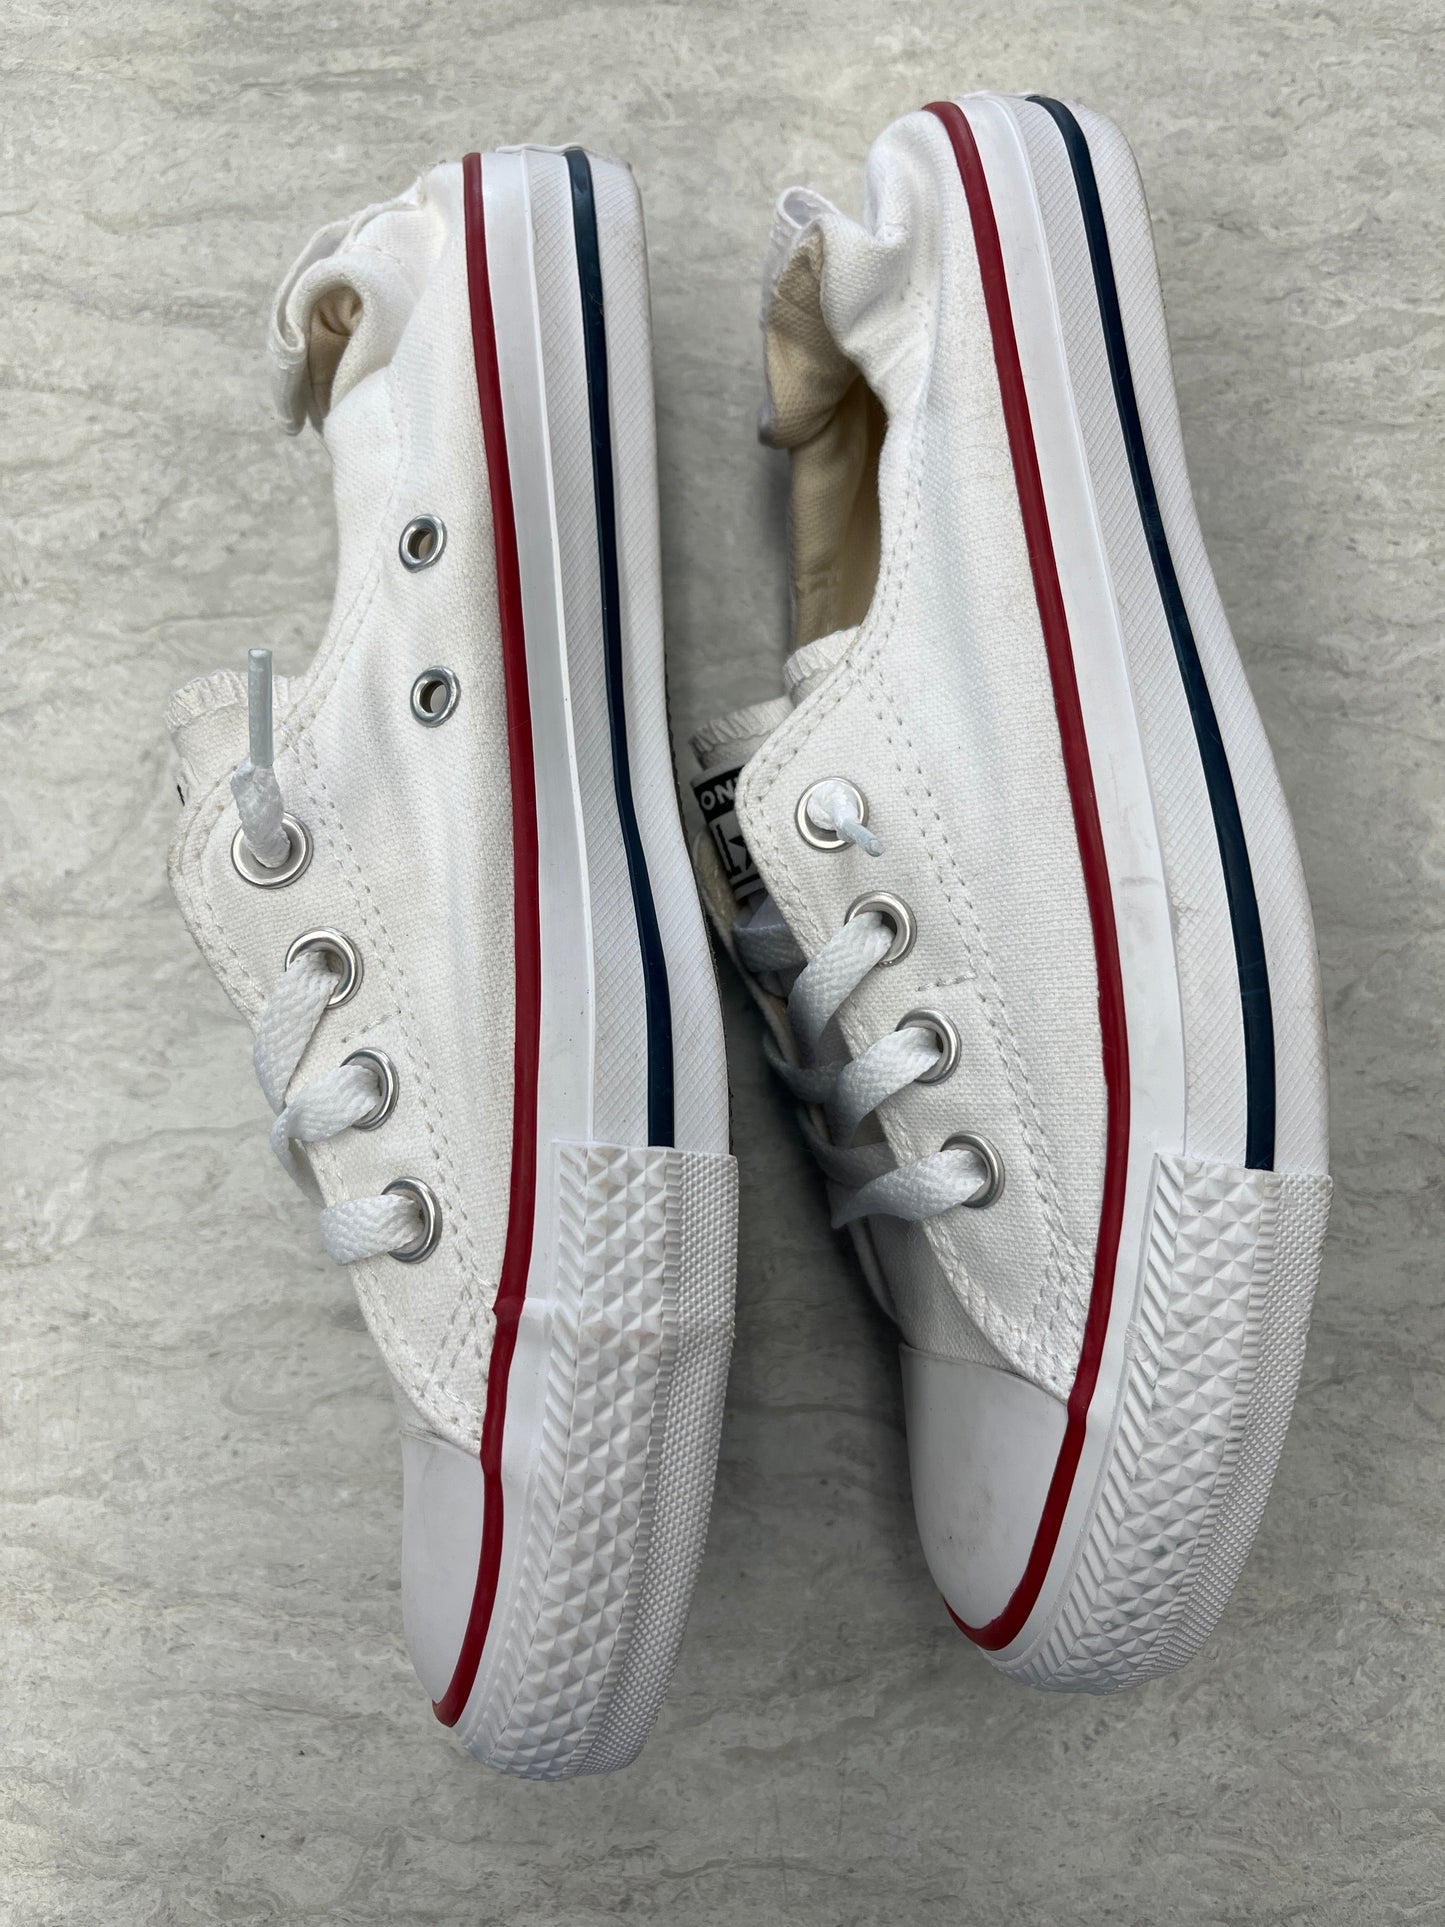 White Shoes Sneakers Converse, Size 7